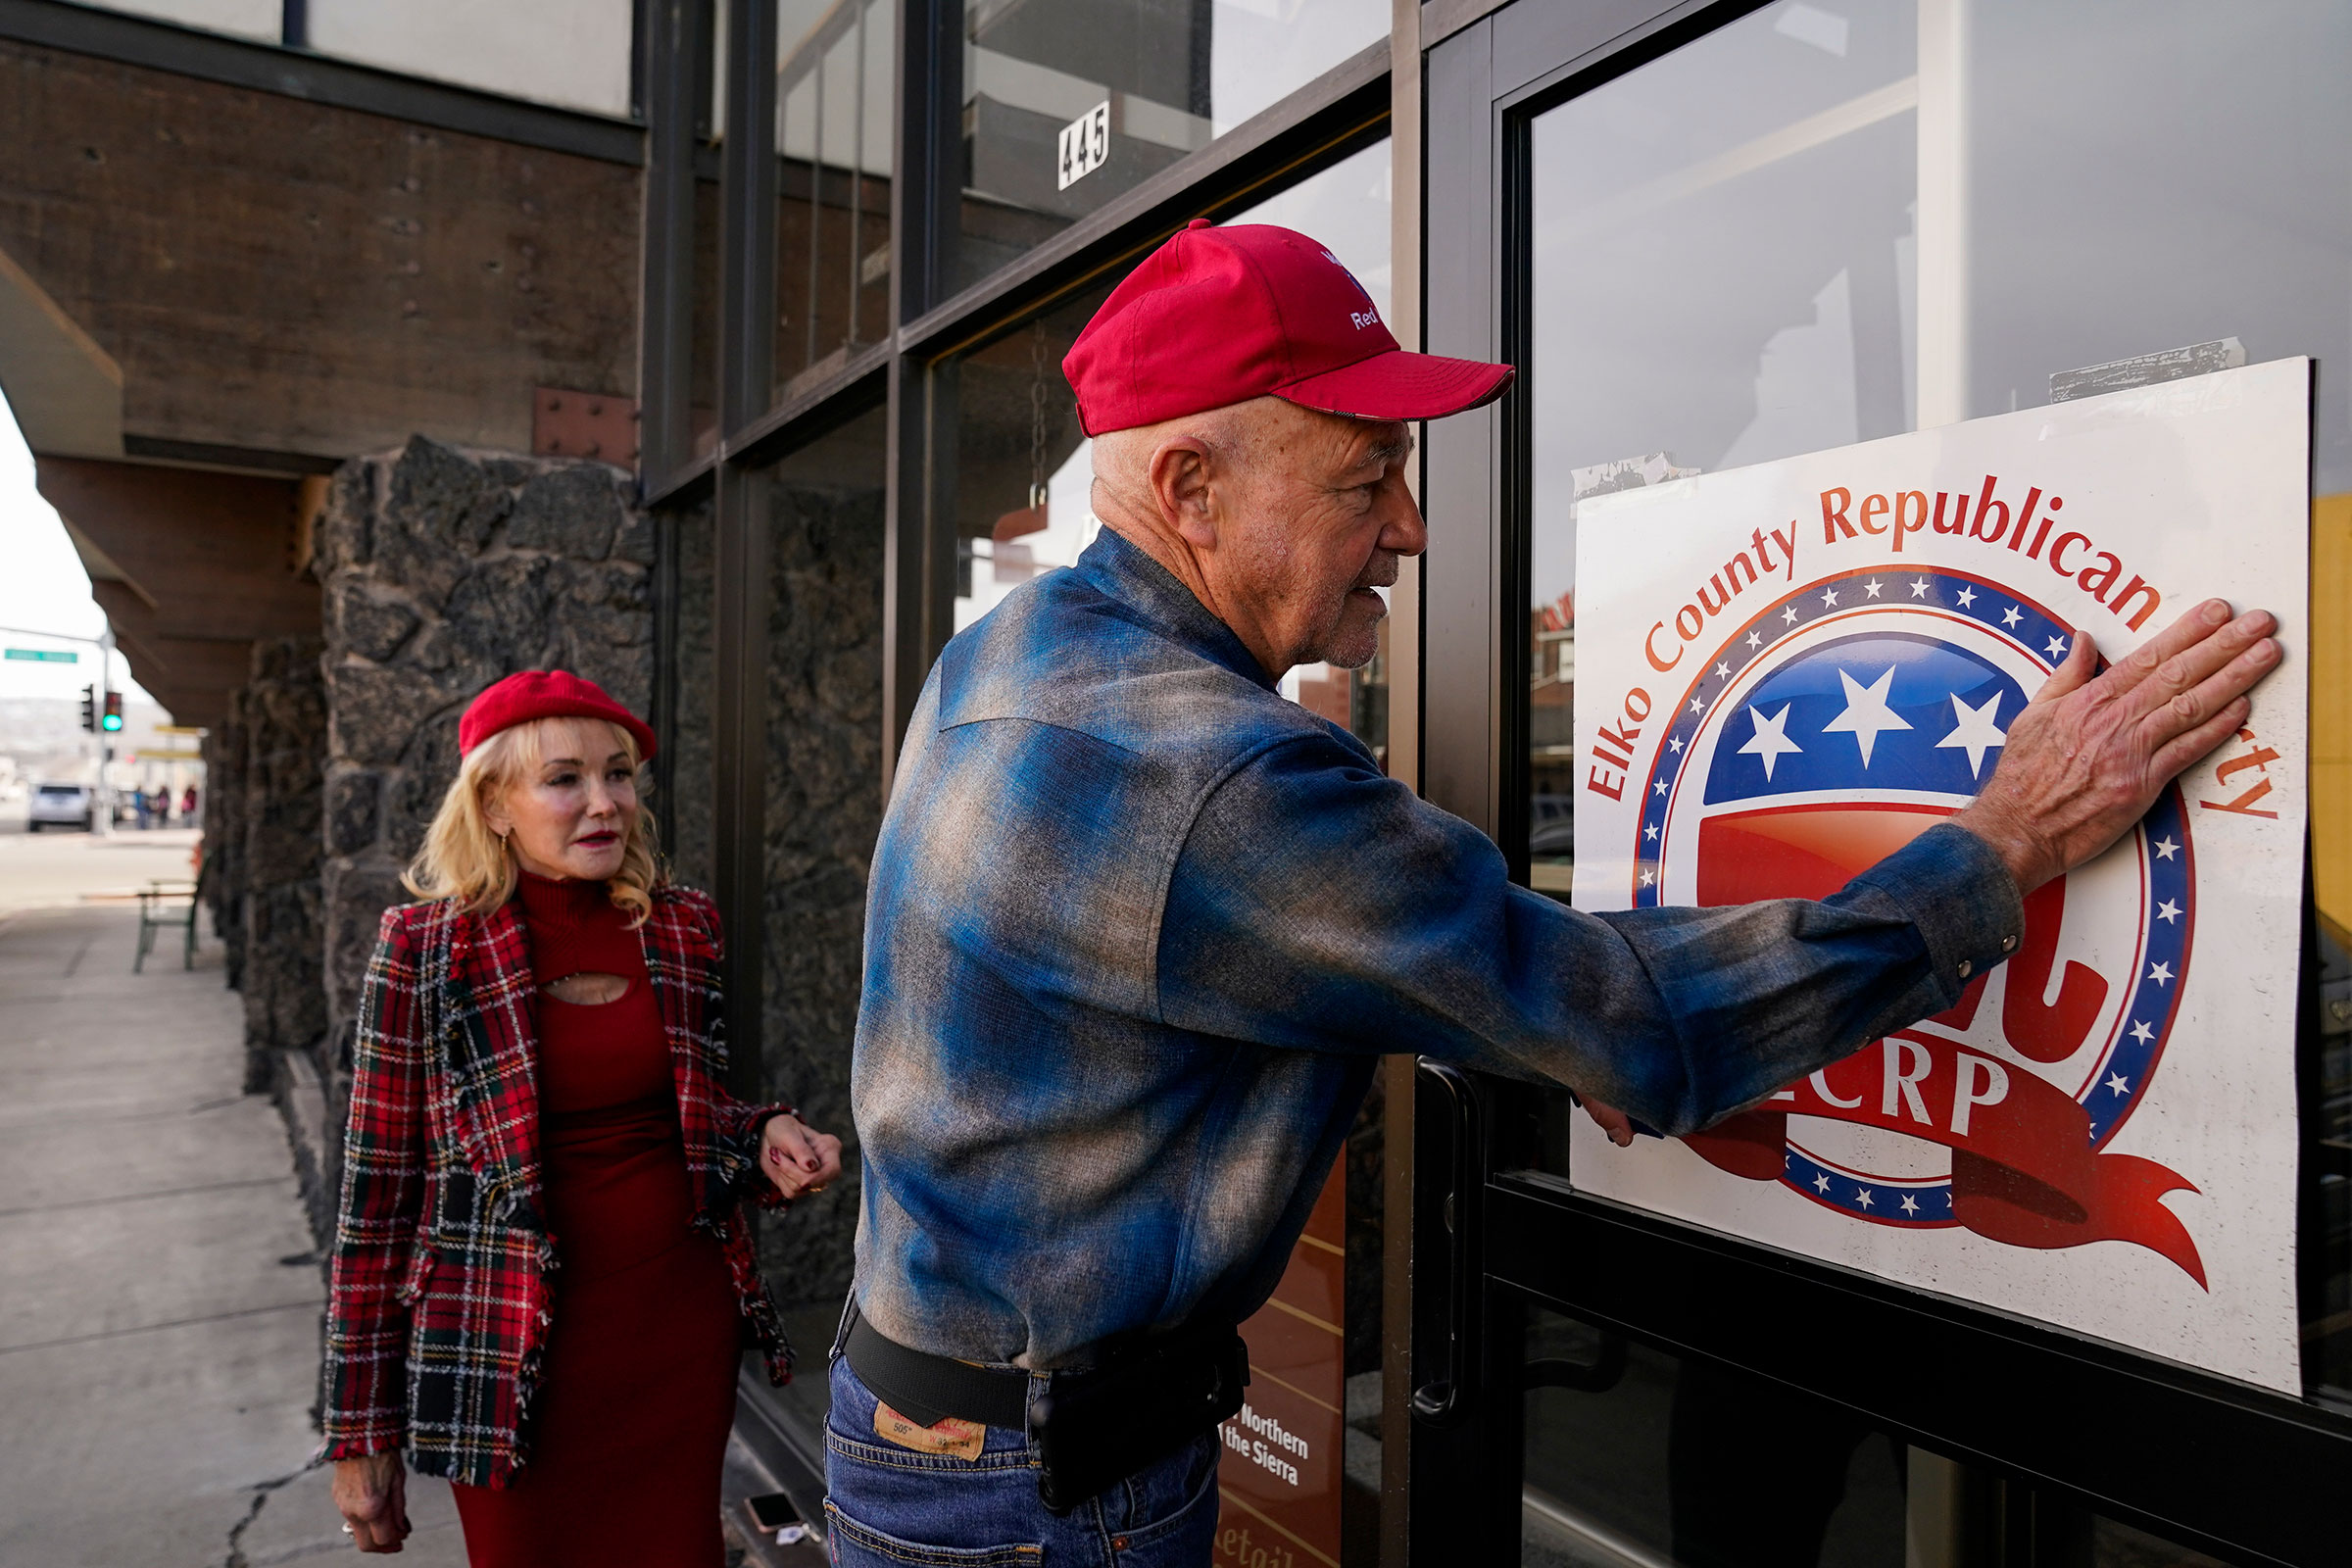 Lee Hoffman, right, tapes a sign for the Elko County Republican Party on the window of a building owned by Lina Blohm, left, on Saturday, December 16, 2023, in Elko, Nevada.